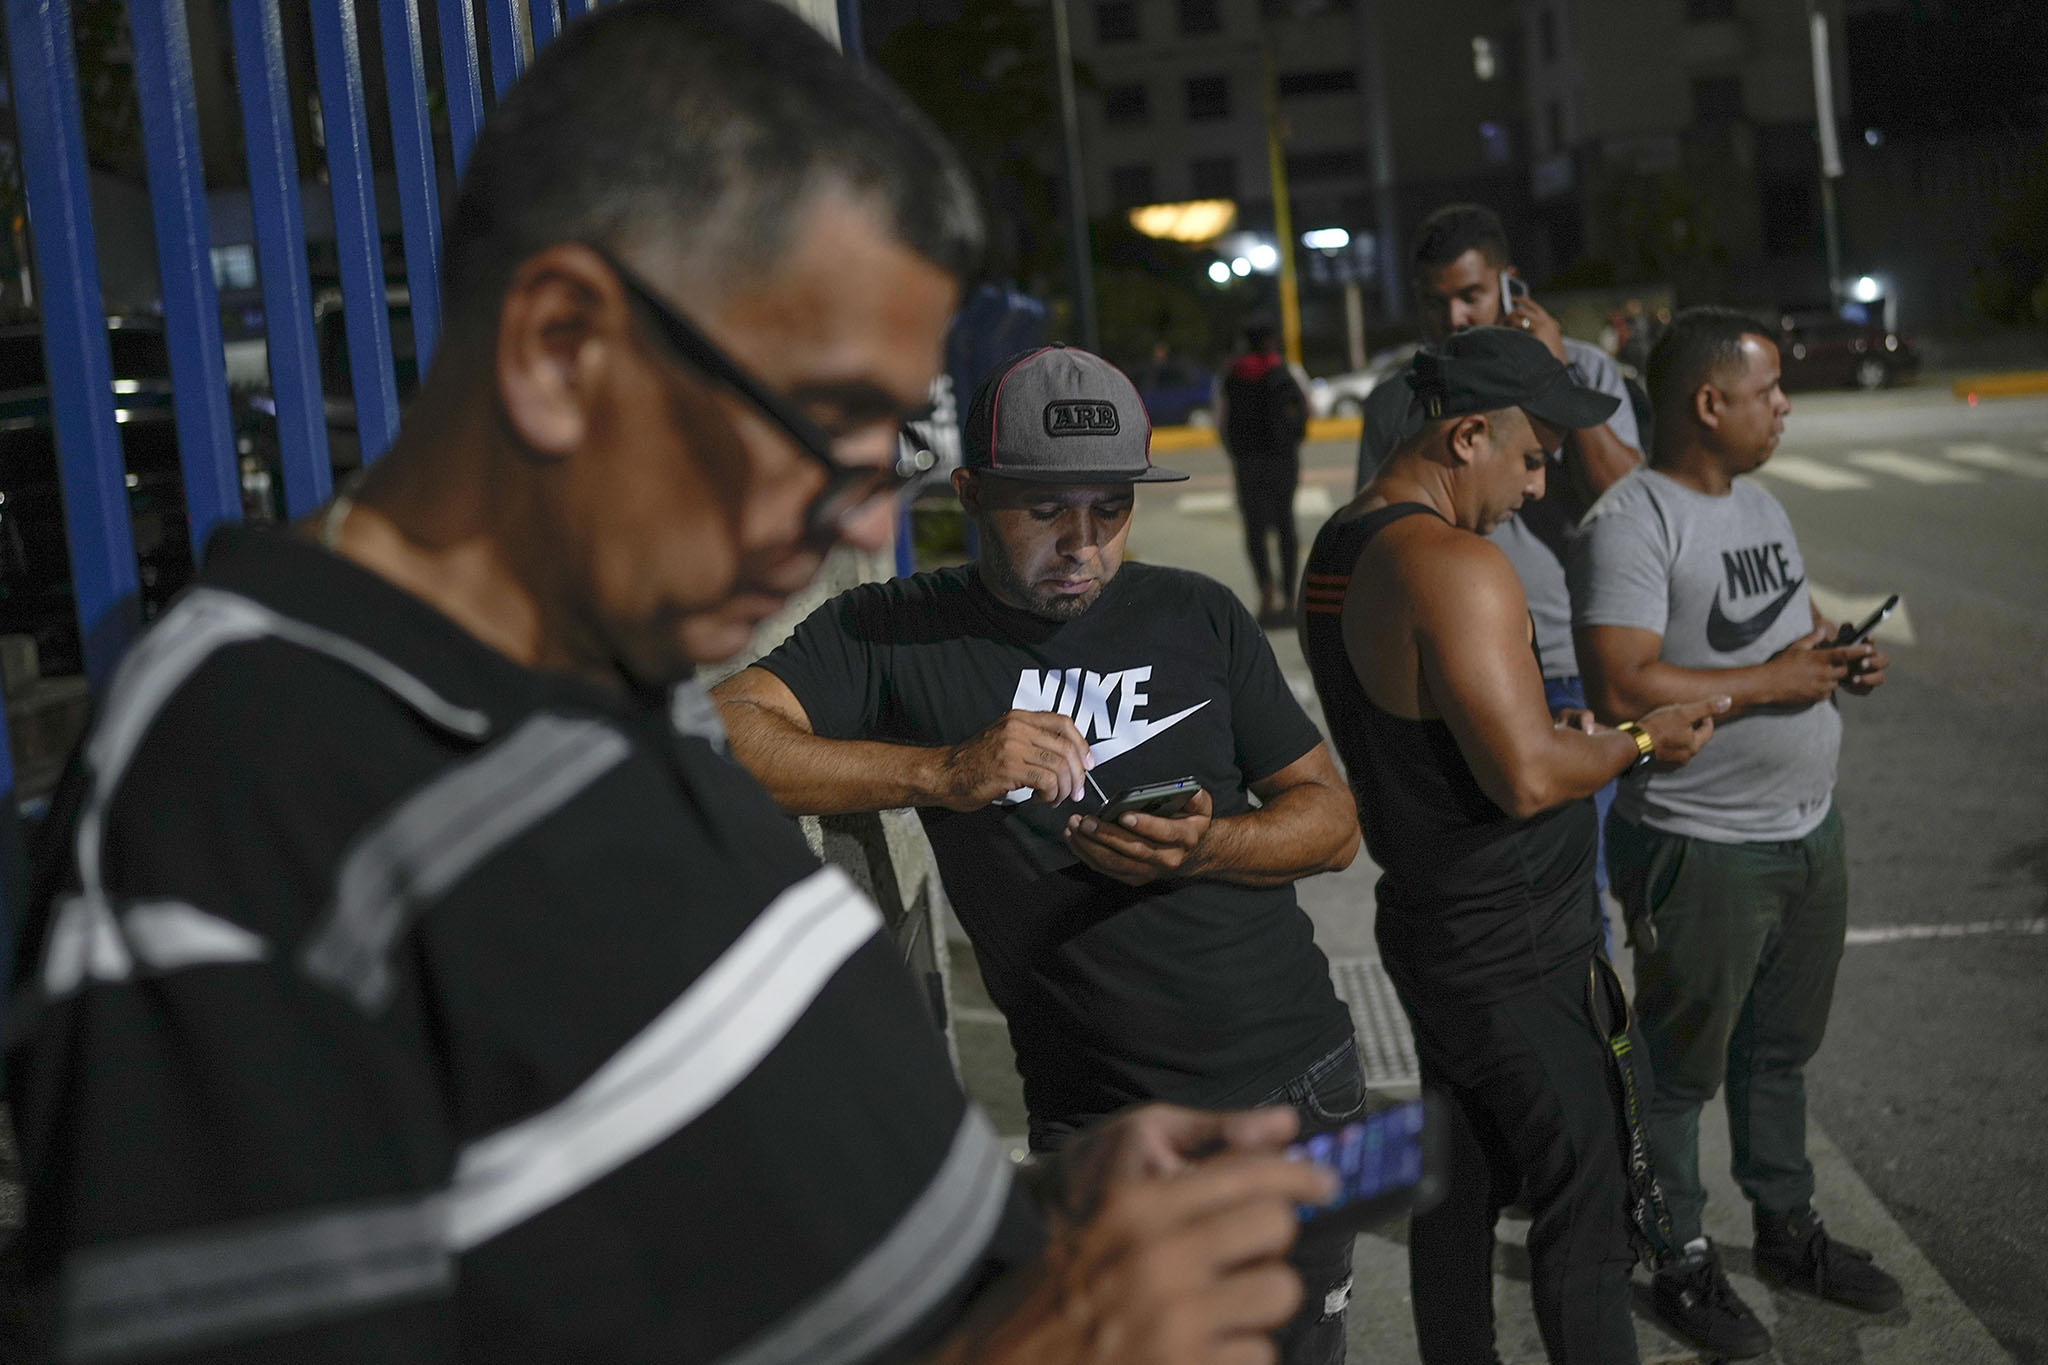 Drivers for a ride-hailing service monitor their cell phones for customers near a shopping mall in Caracas, Venezuela, on May 5, 2022. (Photo by Matias Delacroix/AP)